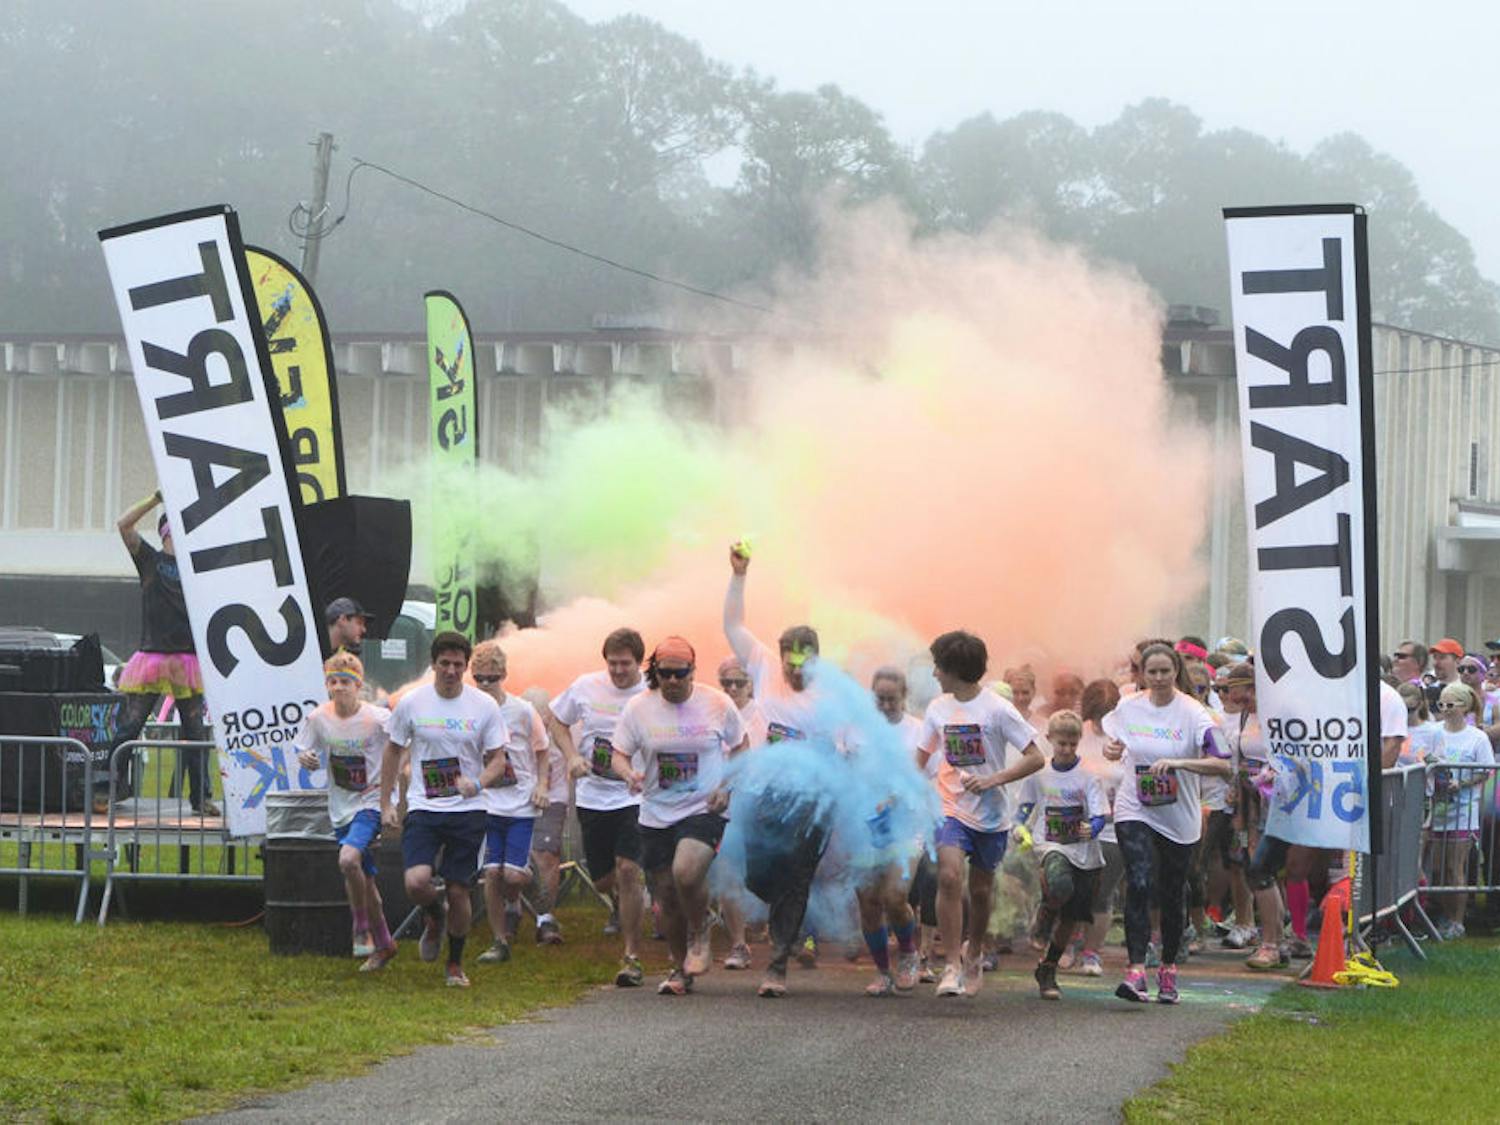 The first wave of runners dash off the starting line during the Color in Motion 5K run at the Alachua County Fairgrounds on Jan. 16, 2016.